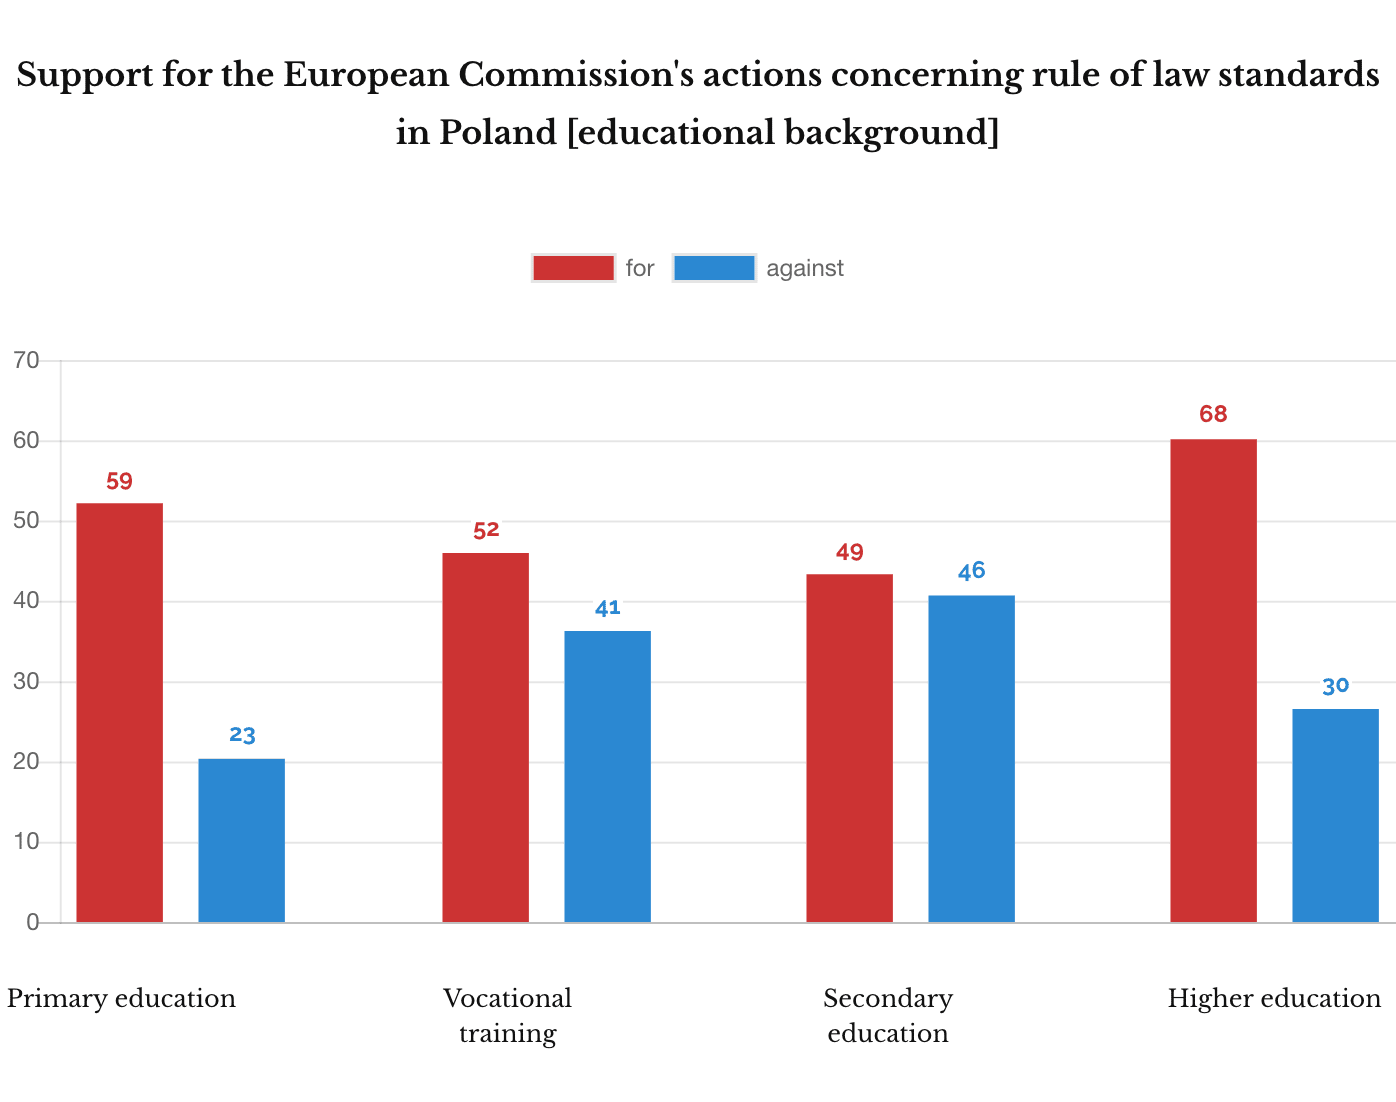 IPSOS December 2018. Support for the European Commission action concerning rule of law [educational background]